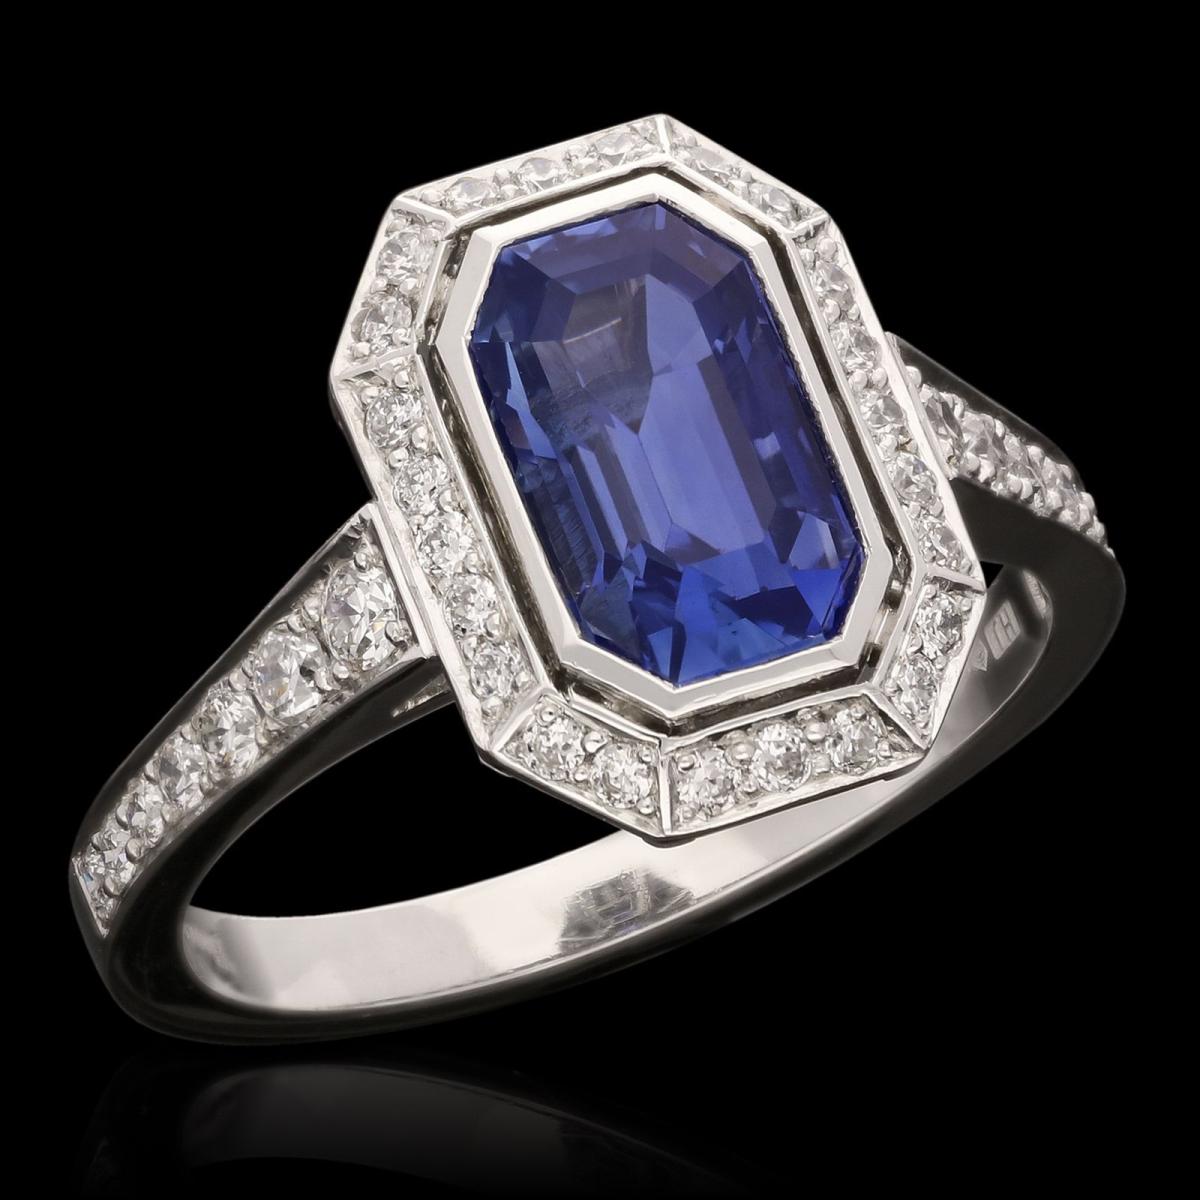 Hancocks 2.15ct Octagonal Step-Cut Sapphire And Diamond Cluster Ring Contemporary